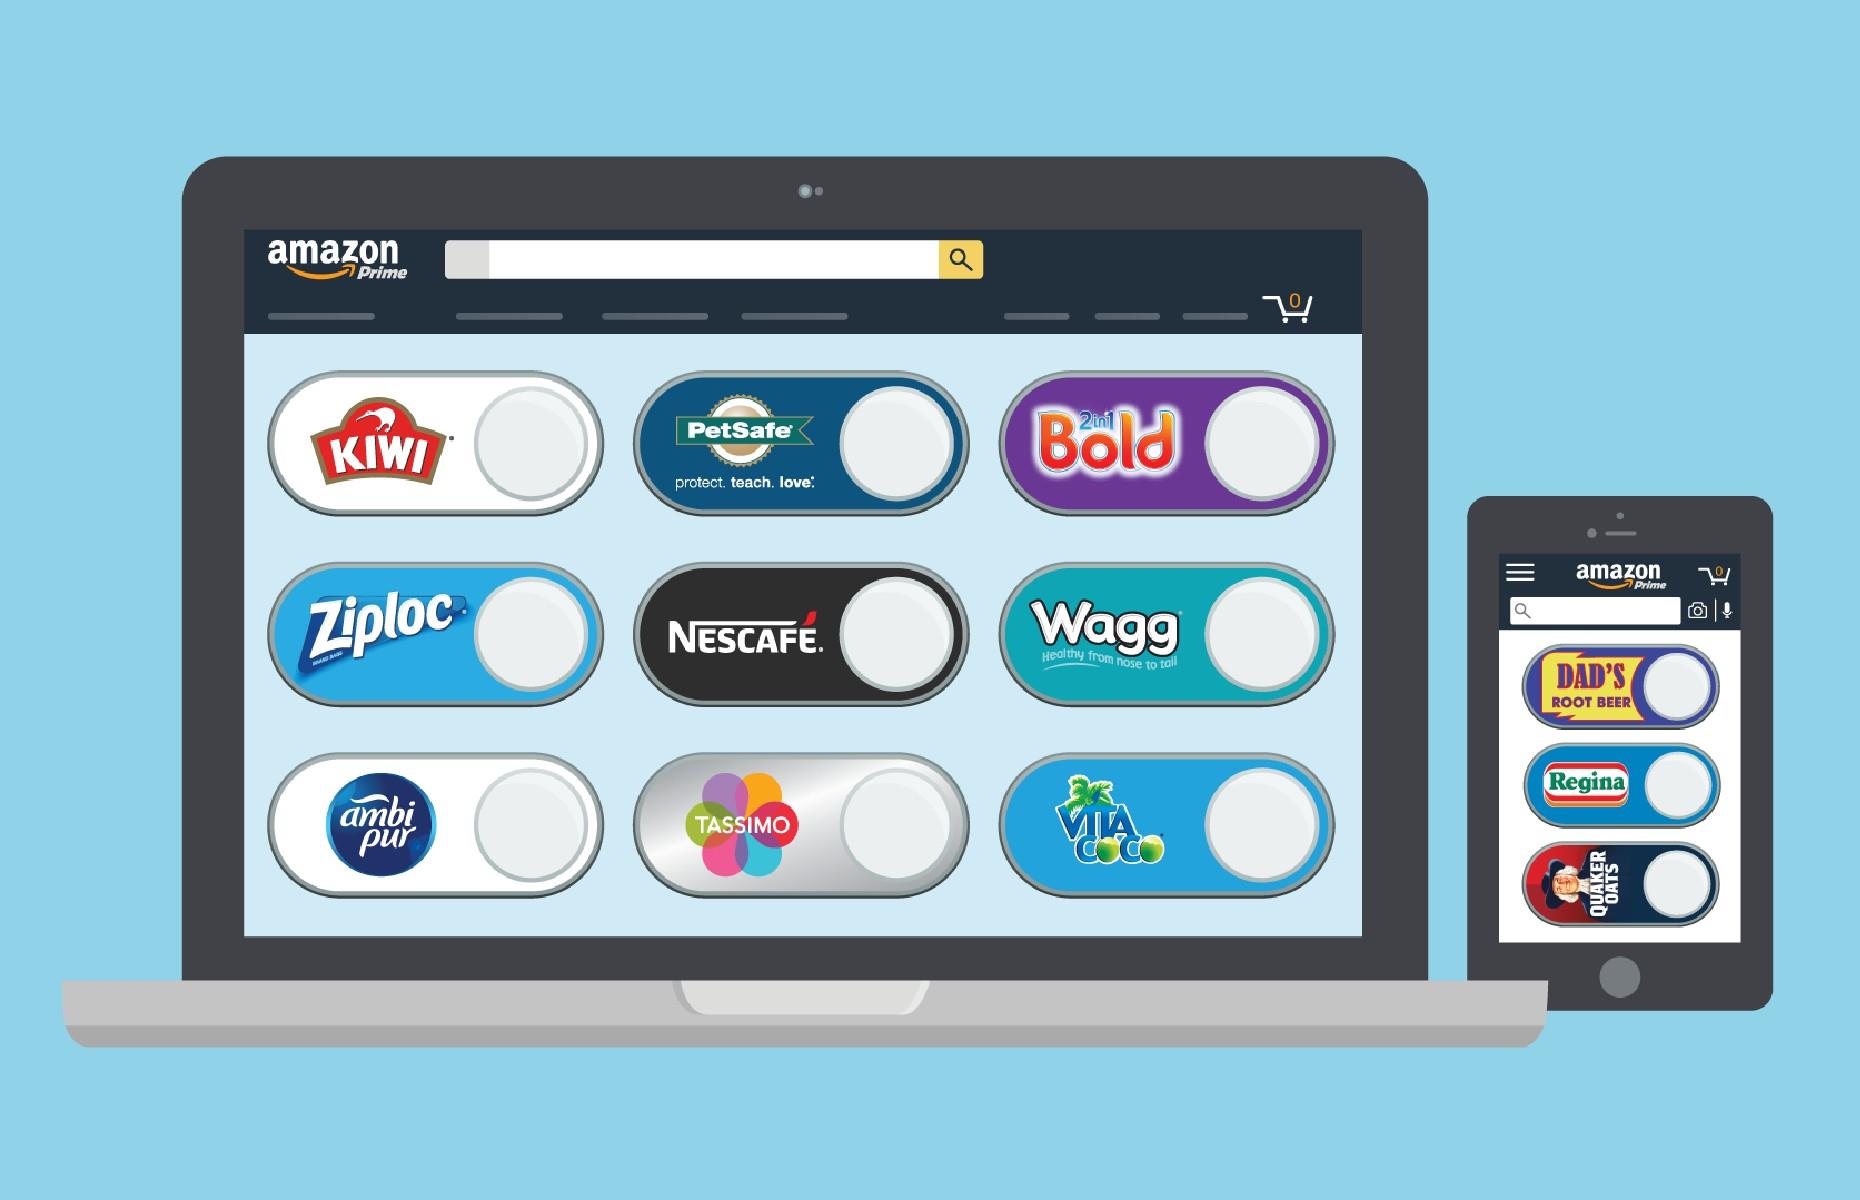 Dash buttons